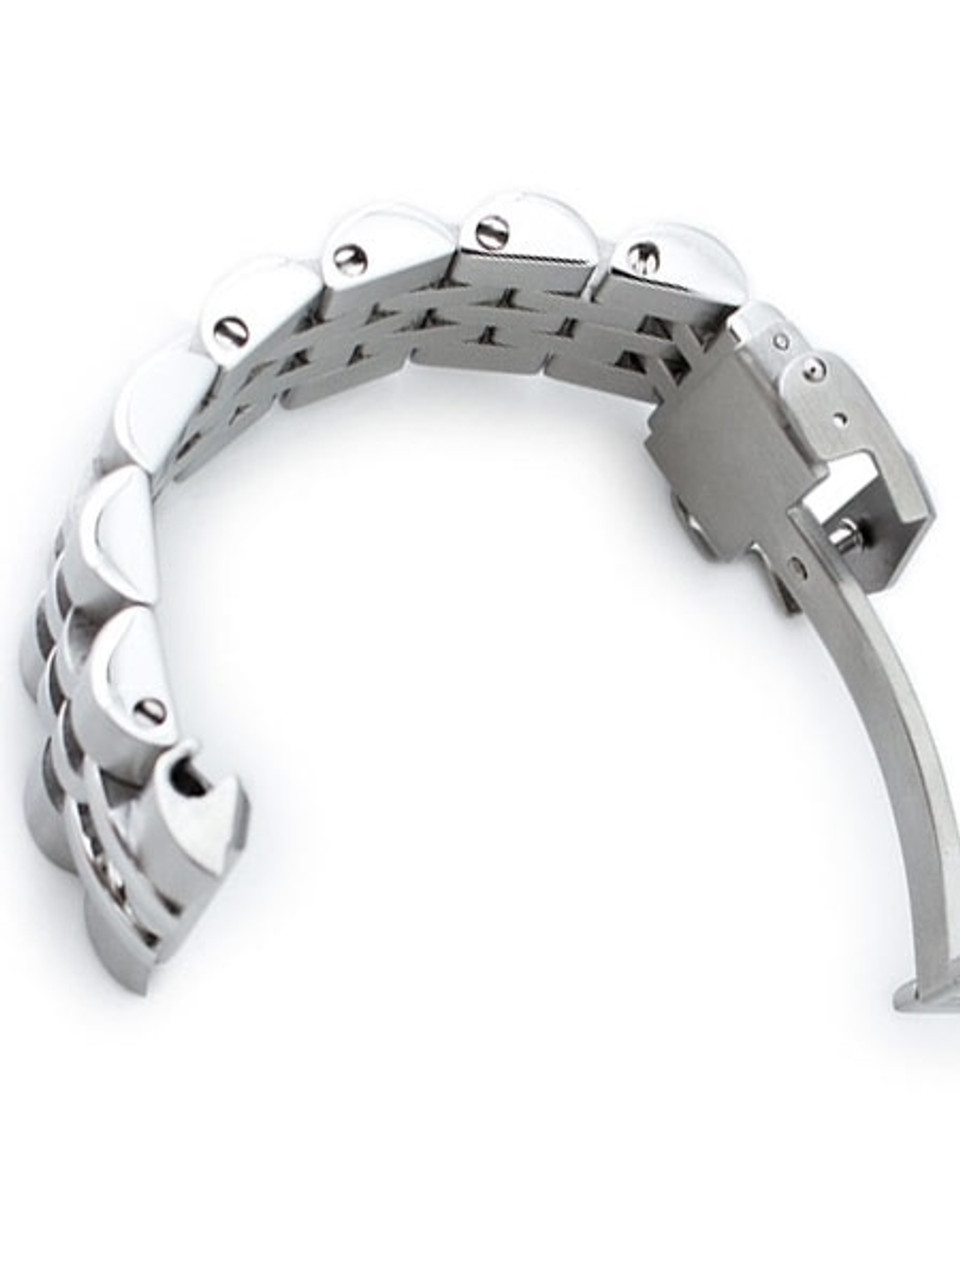 Strapcode Stainless Steel ANGUS Jubilee Bracelet for Seiko Turtle